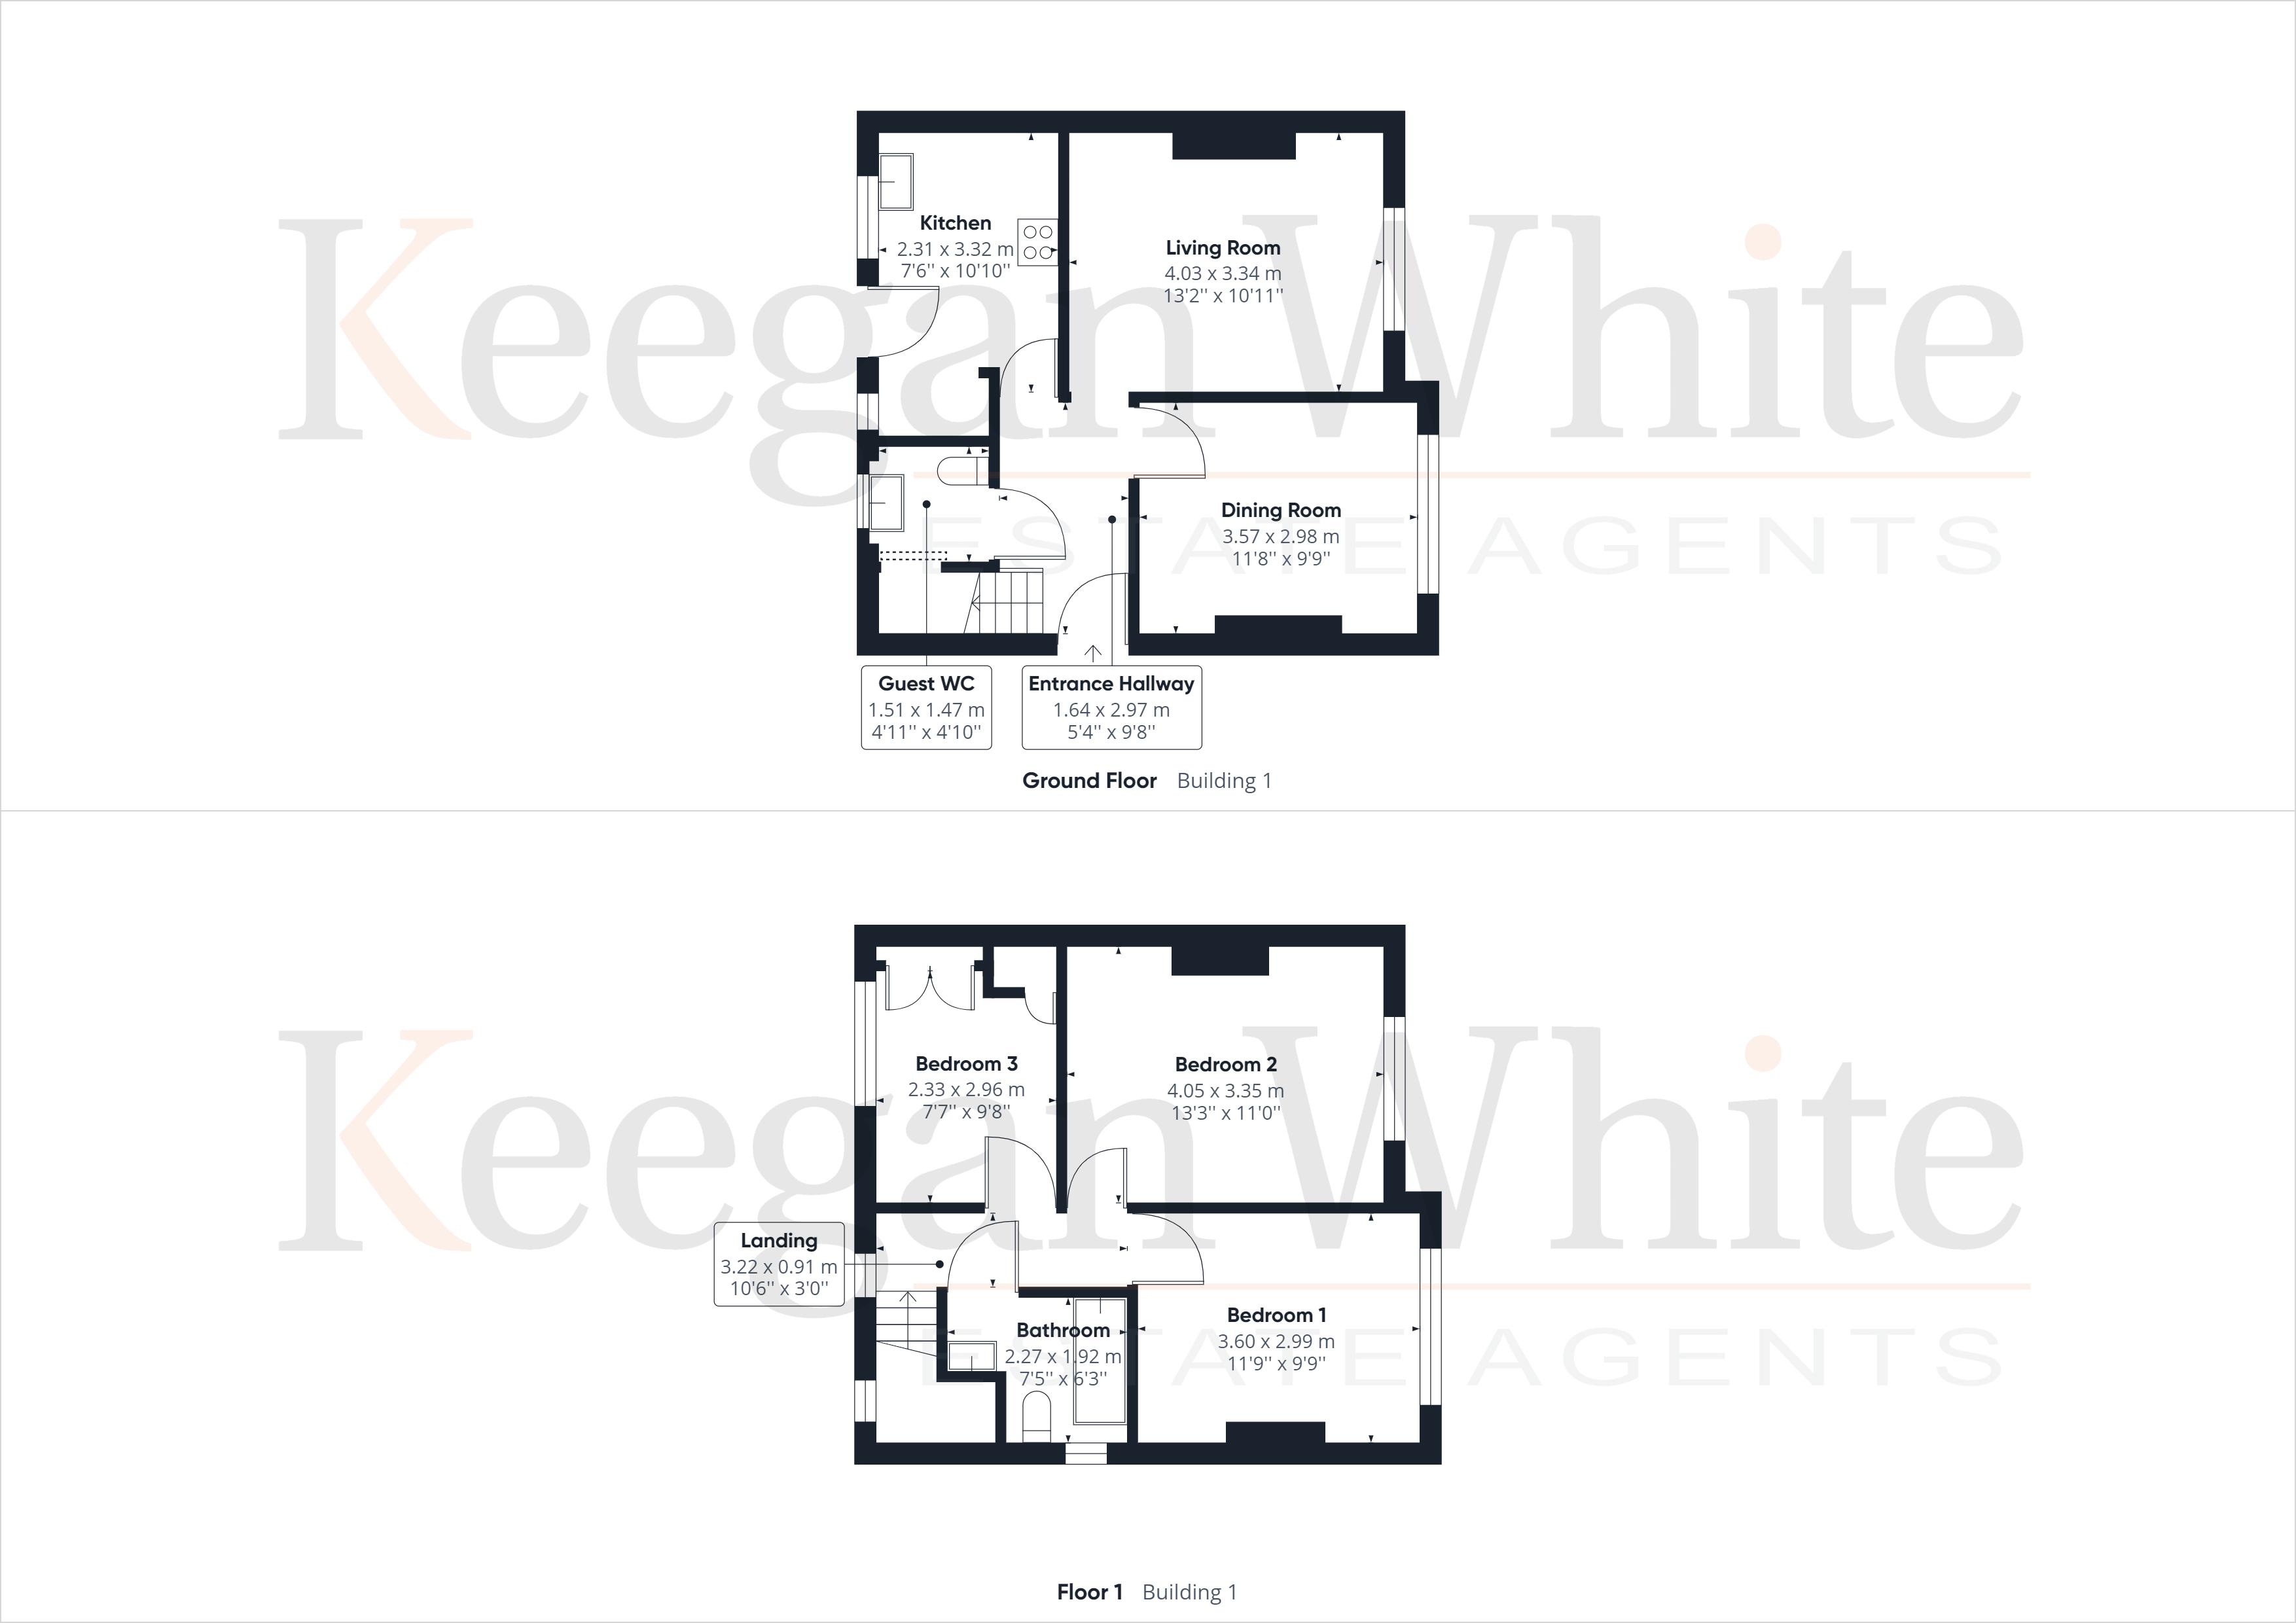 Keegan White Estate Agents in High Wycombe - Floor